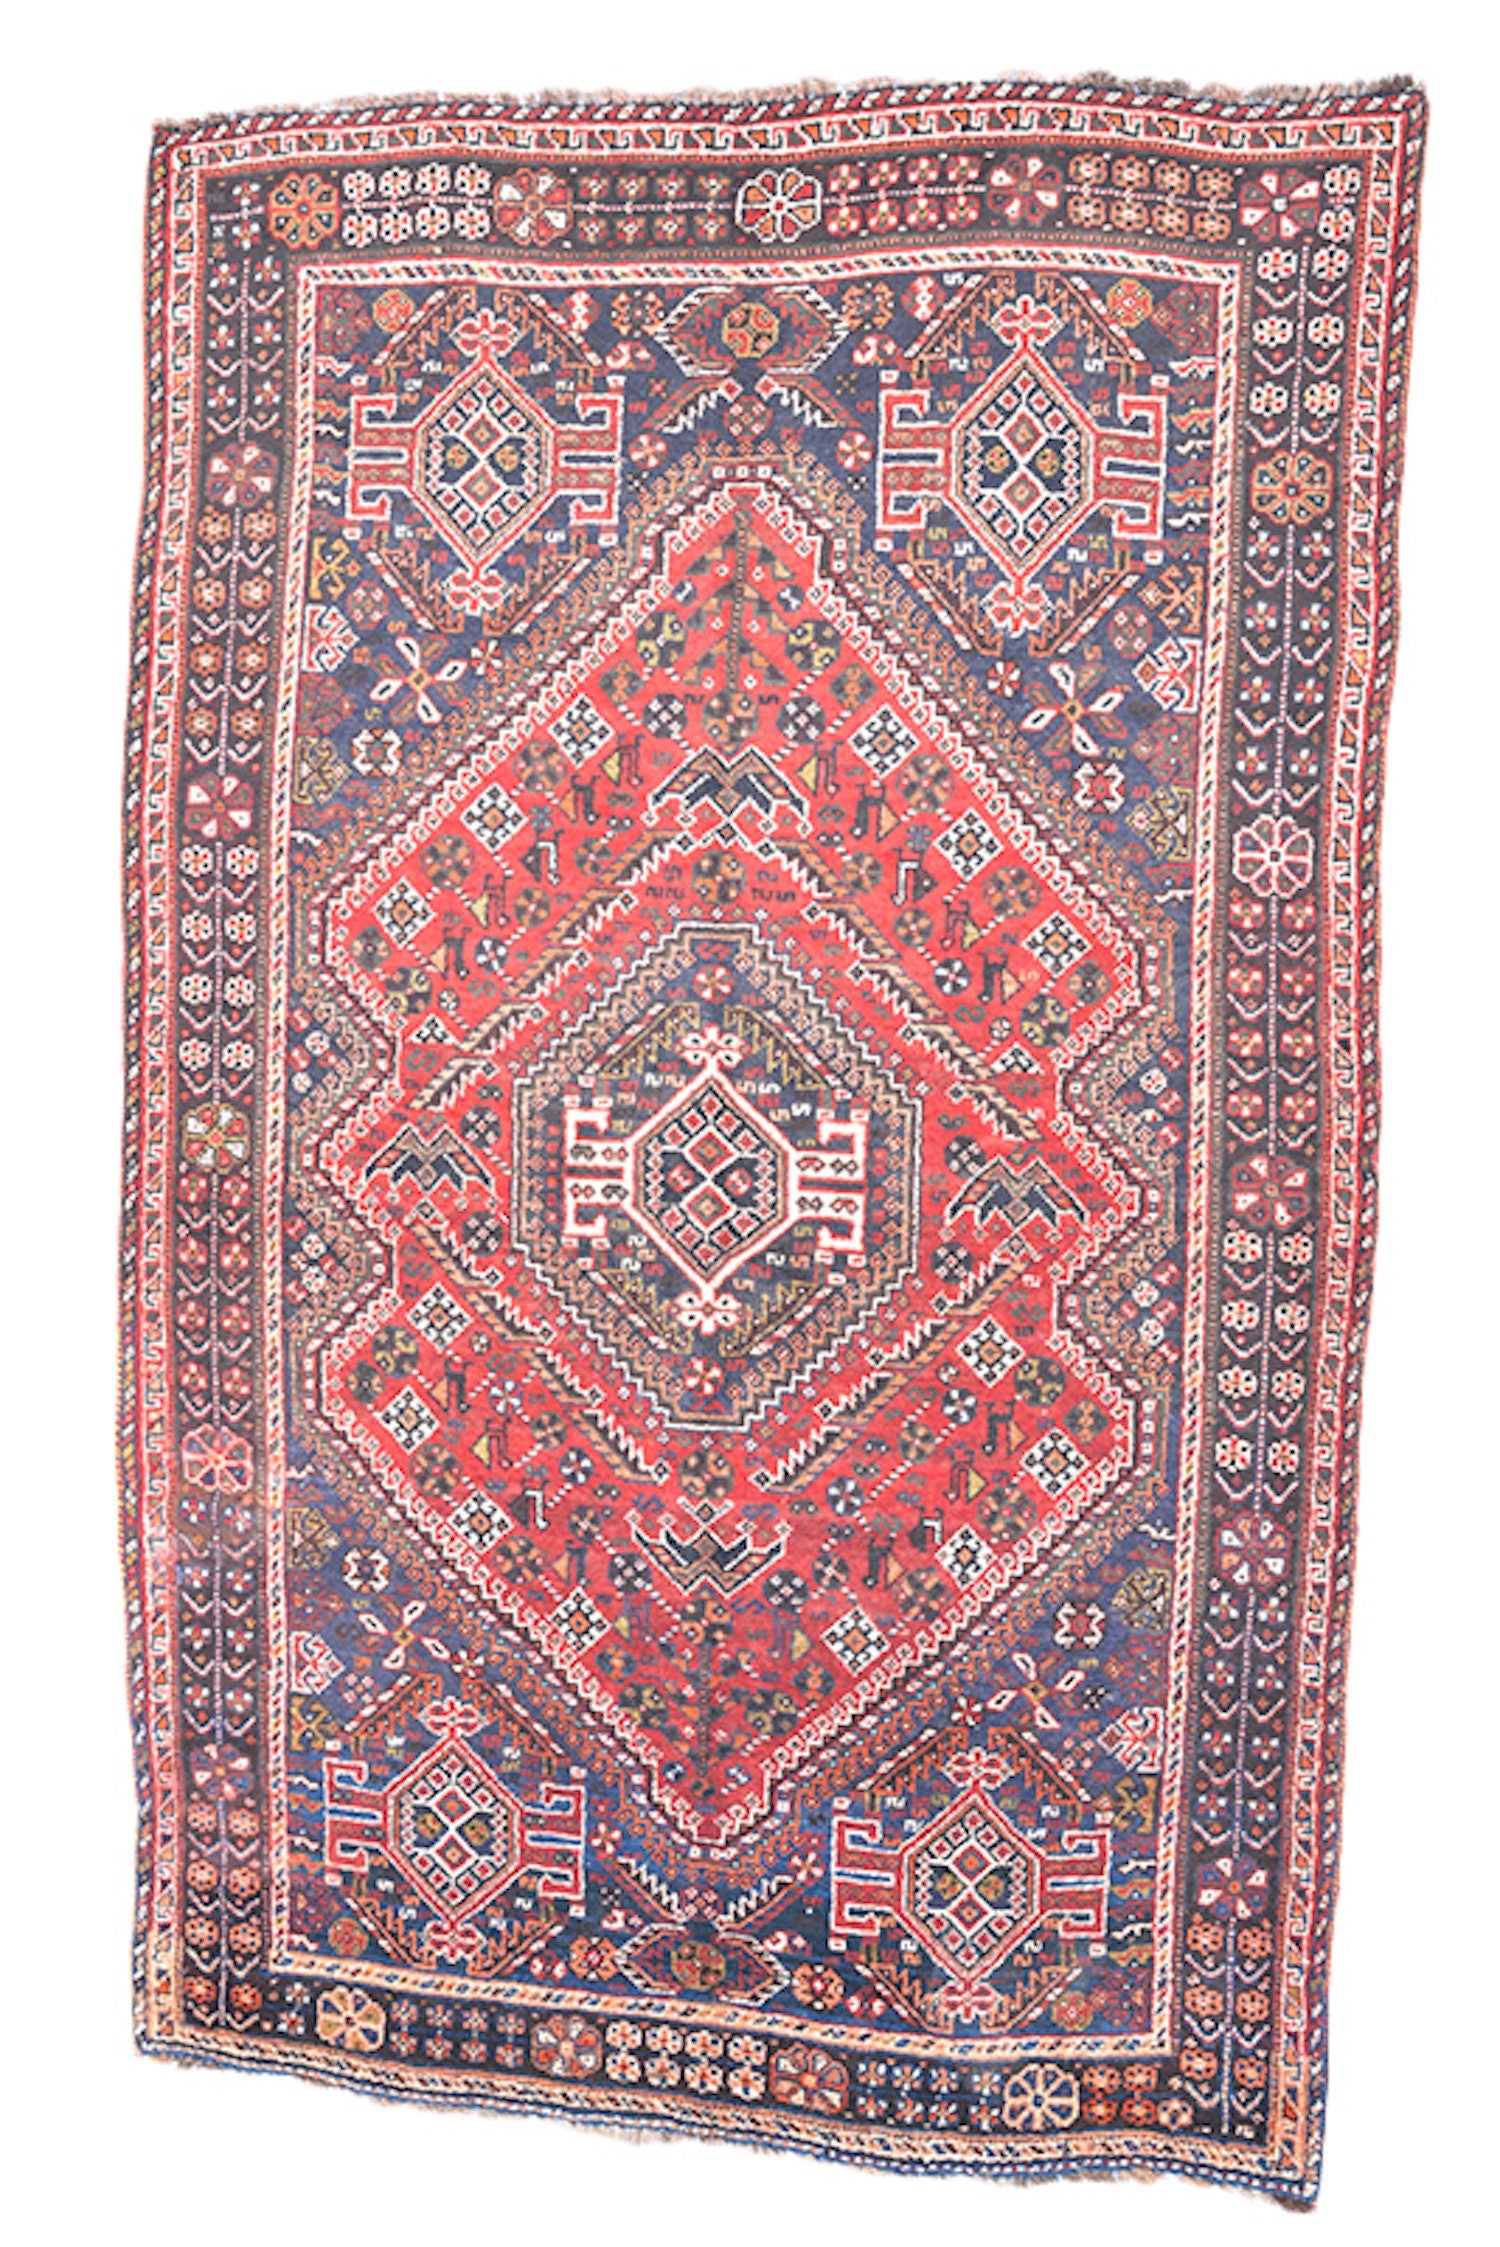 Red Medallion Handmade Rug | Red Navy Blue | 4 x 7 Ft | Persian Turkish Style | Boho Tribal Nomadic | Hand Knotted Wool Rug